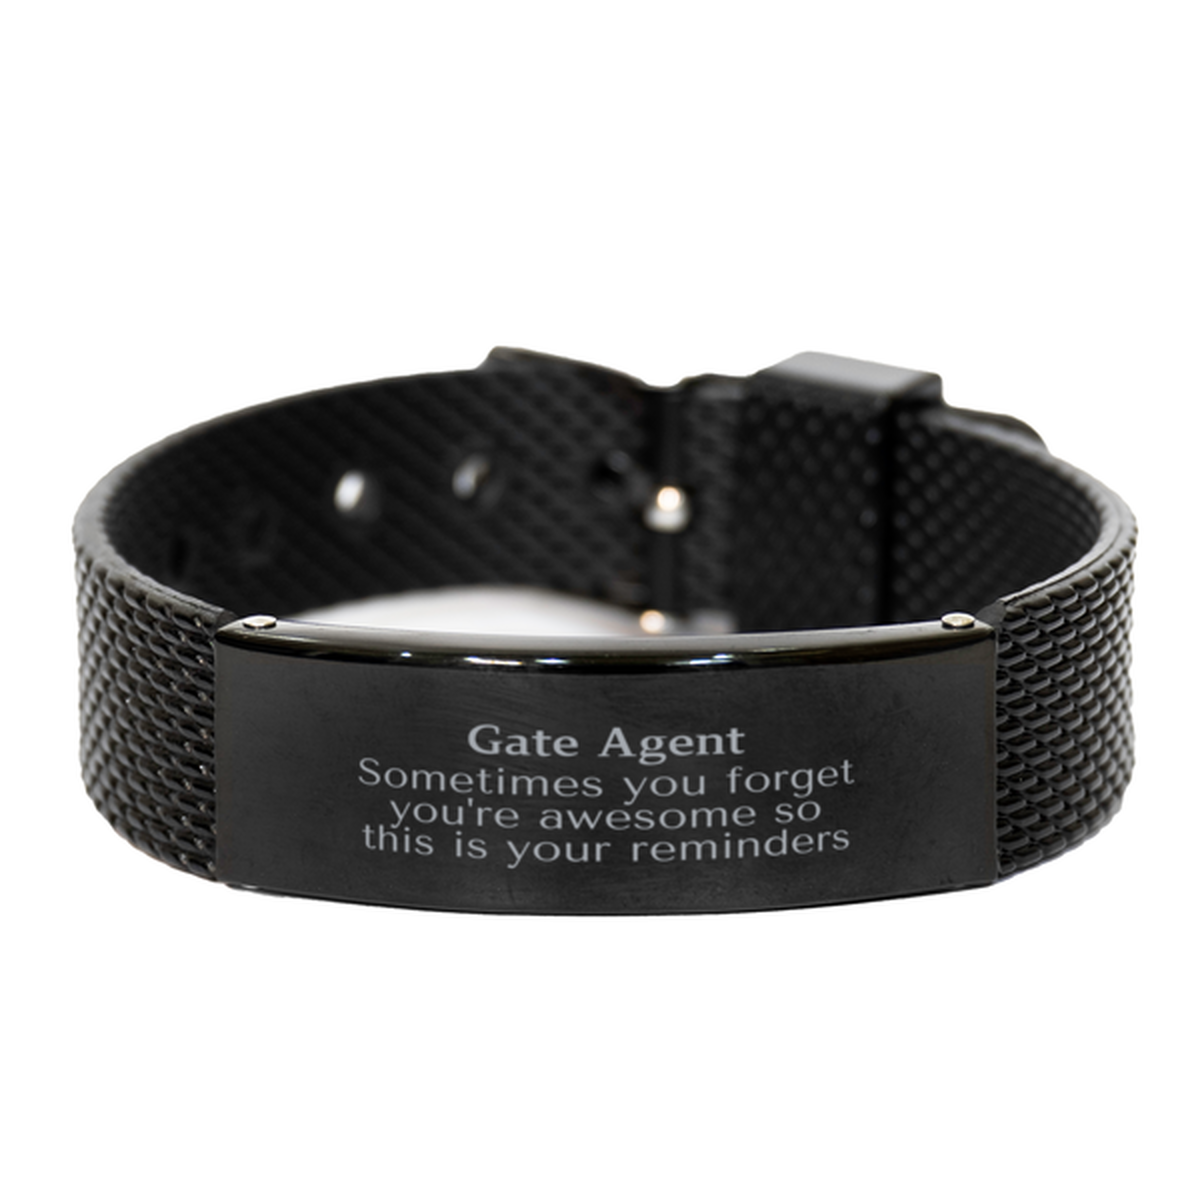 Sentimental Gate Agent Black Shark Mesh Bracelet, Gate Agent Sometimes you forget you're awesome so this is your reminders, Graduation Christmas Birthday Gifts for Gate Agent, Men, Women, Coworkers